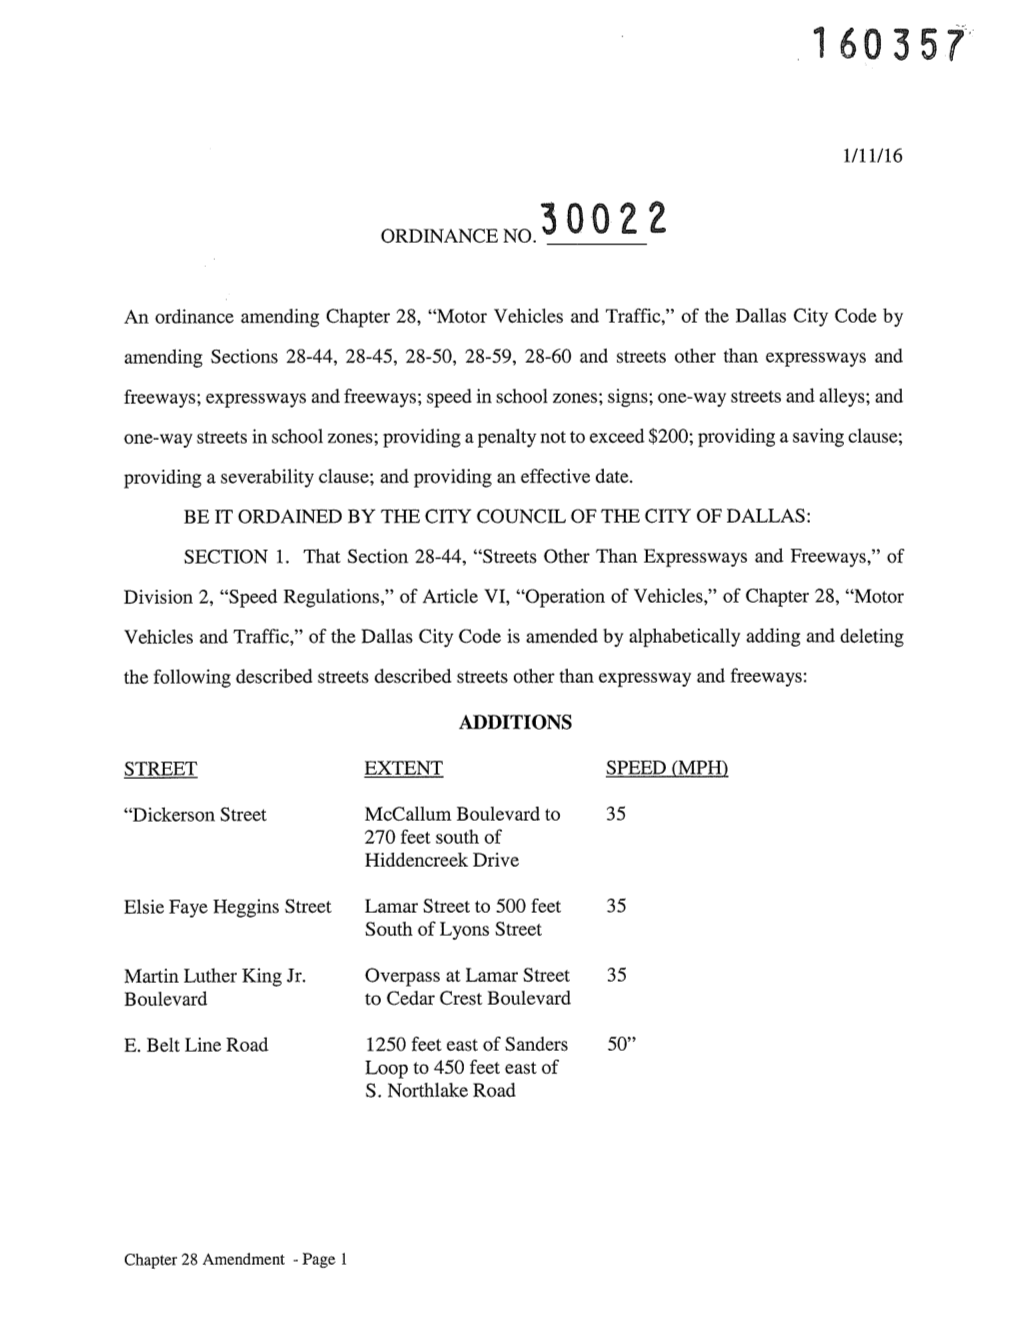 “Motor Vehicles and Traffic,” of the Dallas City Code by Amending Se